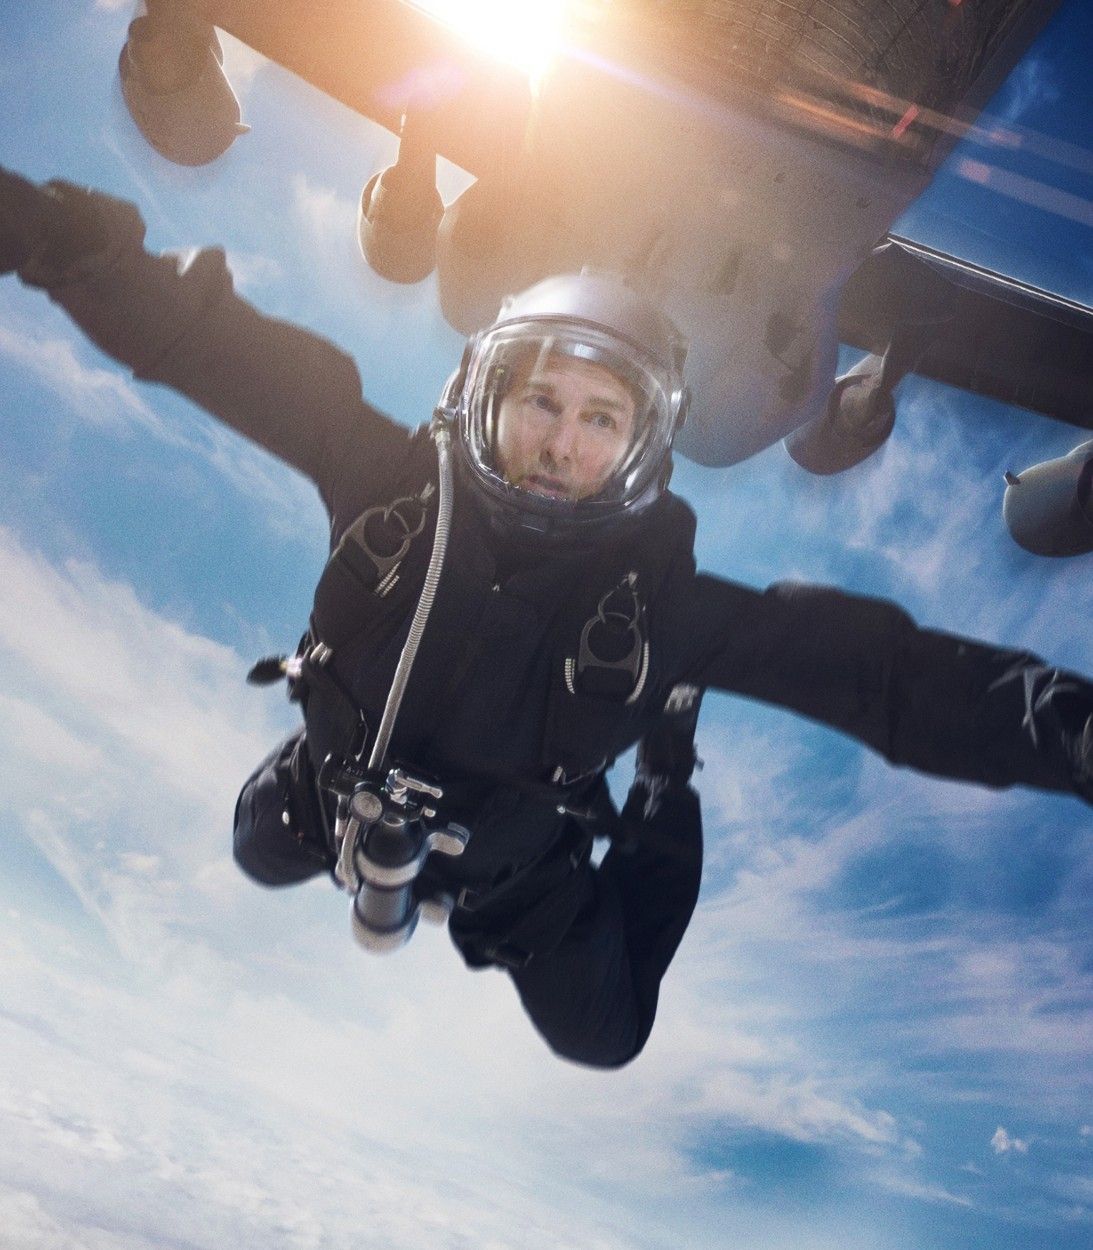 Mission Impossible Fallout Tom Cruise skydive Vertical